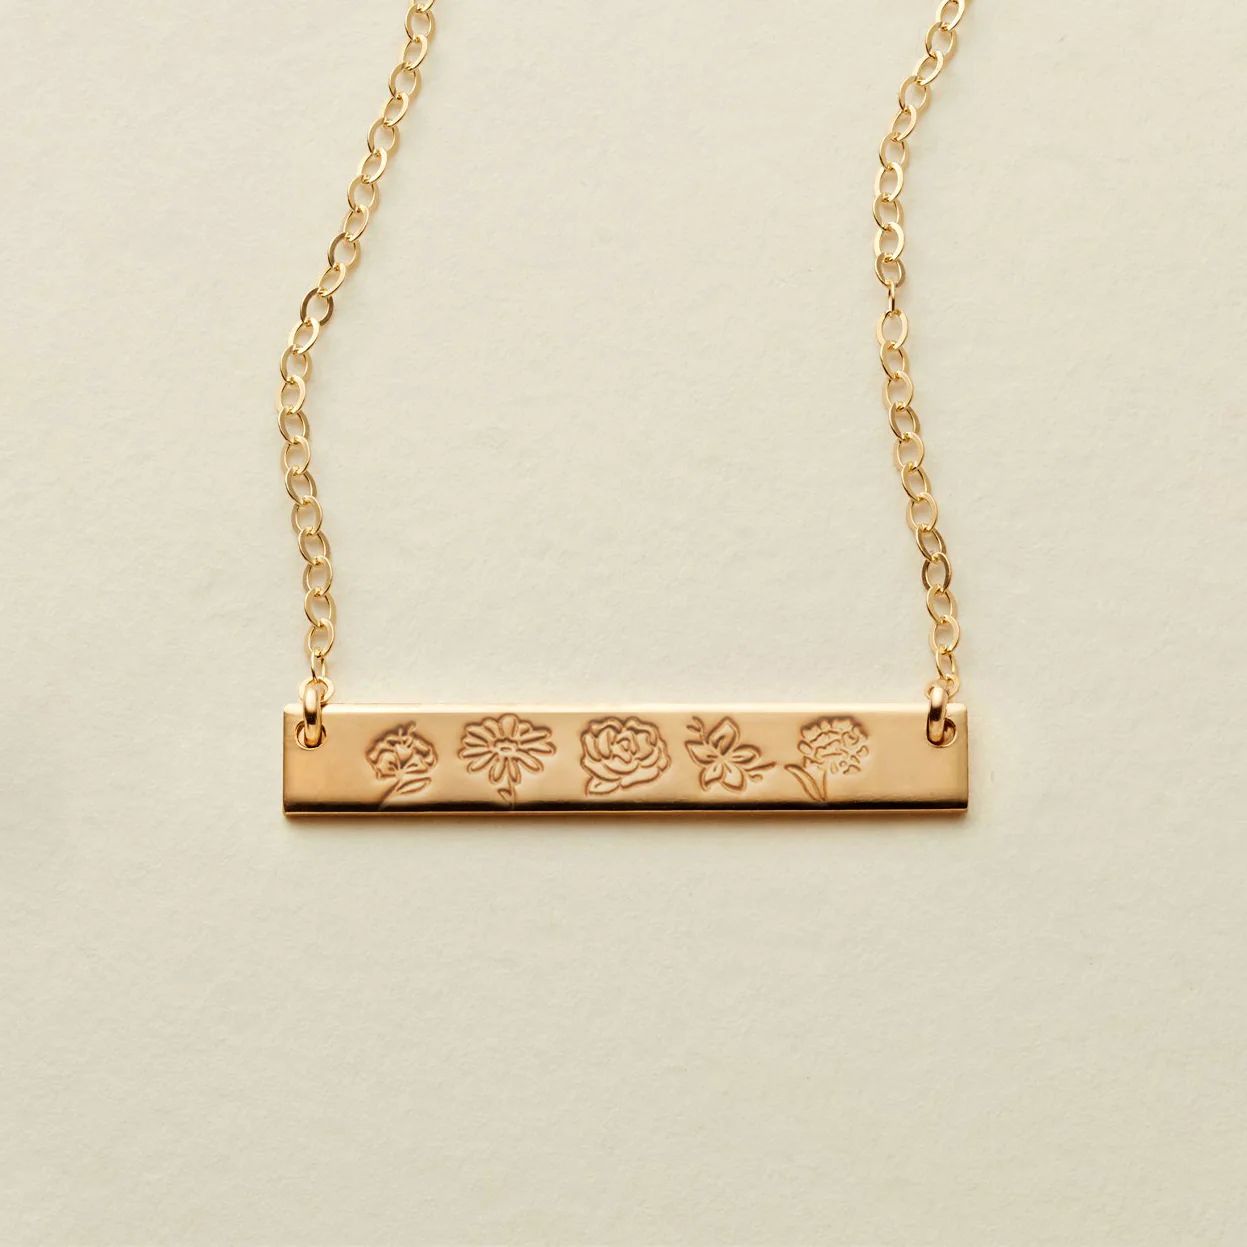 Birth Flower Bar Necklace | Made by Mary (US)